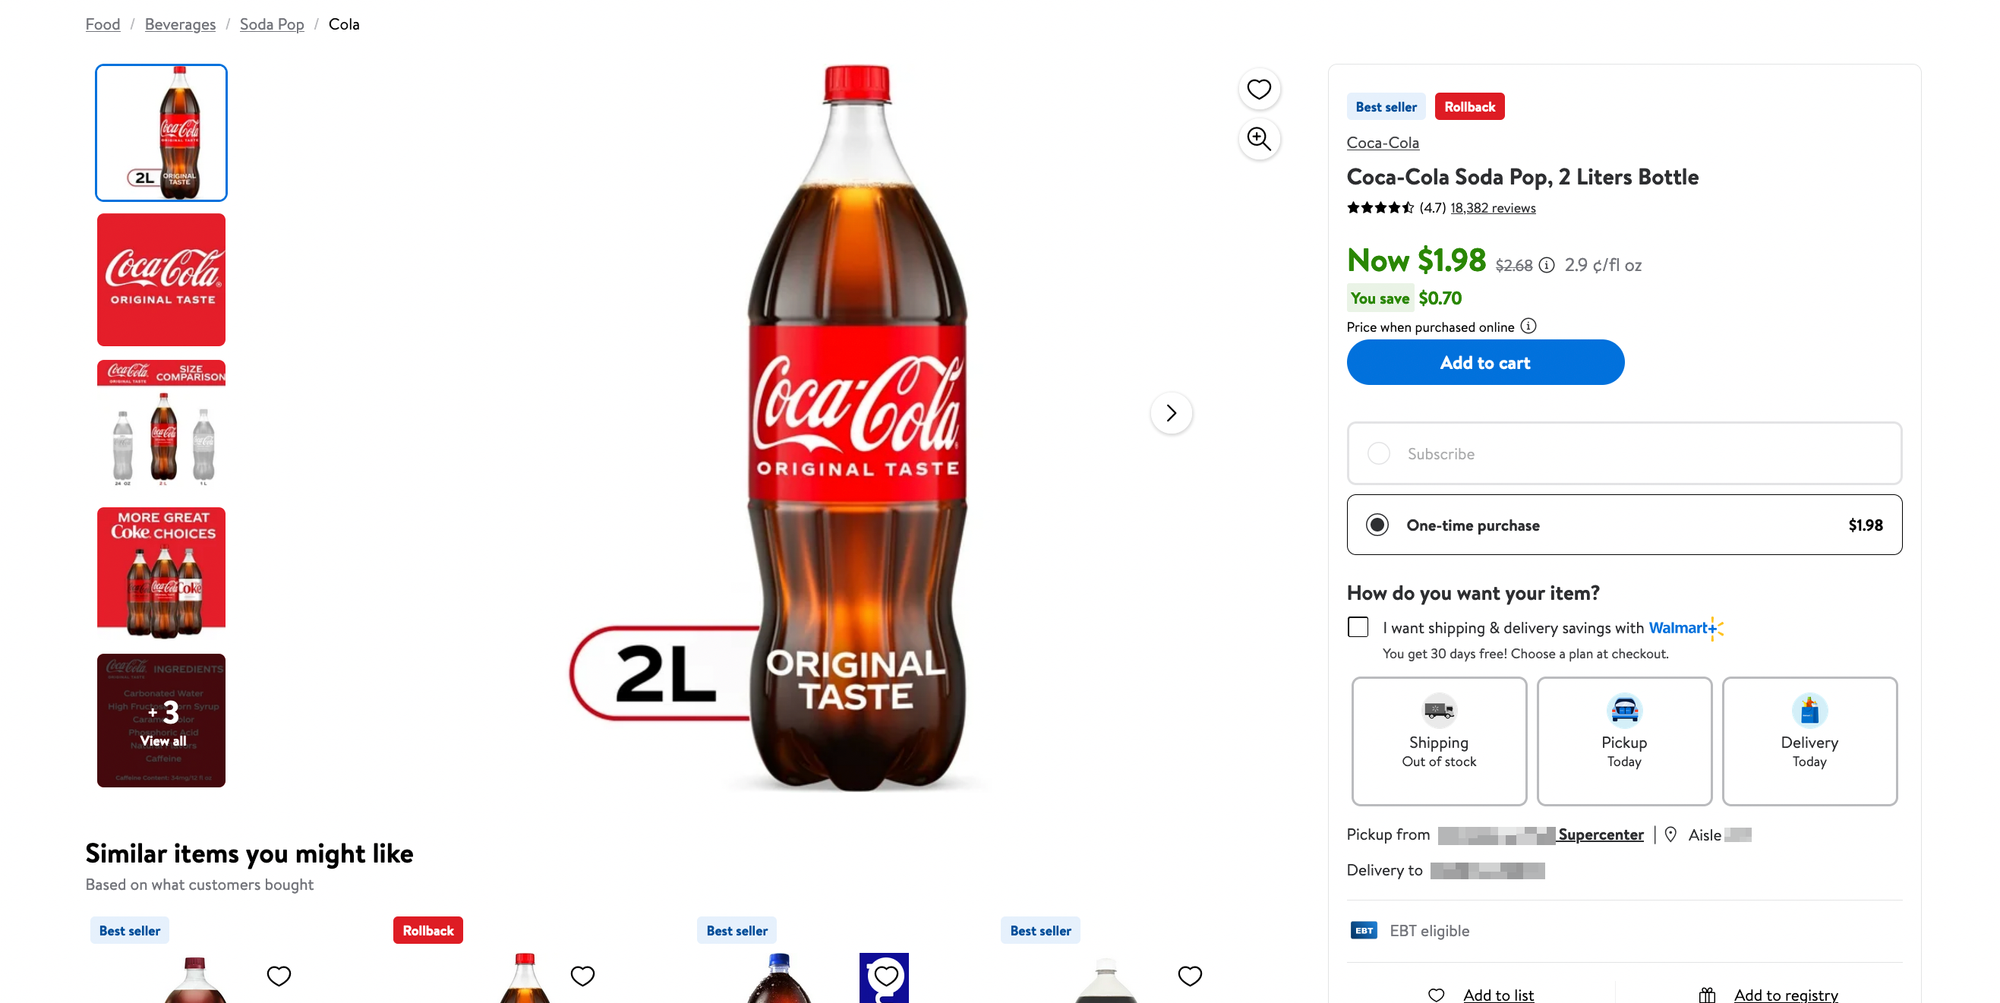 screenshot of walmart product page for 2 liter coke bottle, price is $1.98